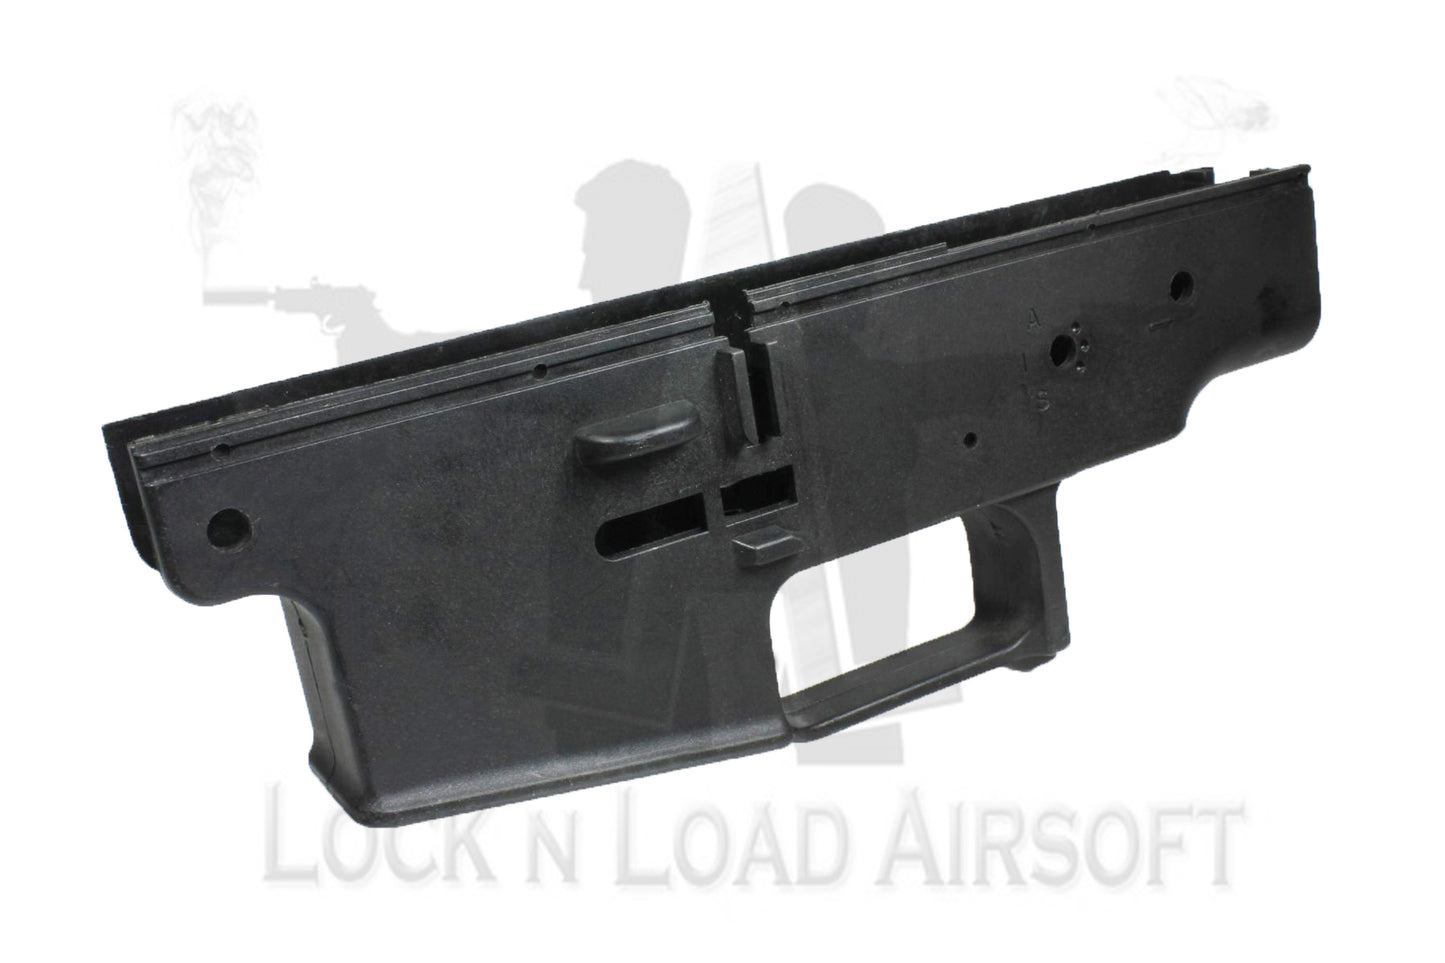 Drop In SCAR Stripped Lower Receiver Replacement